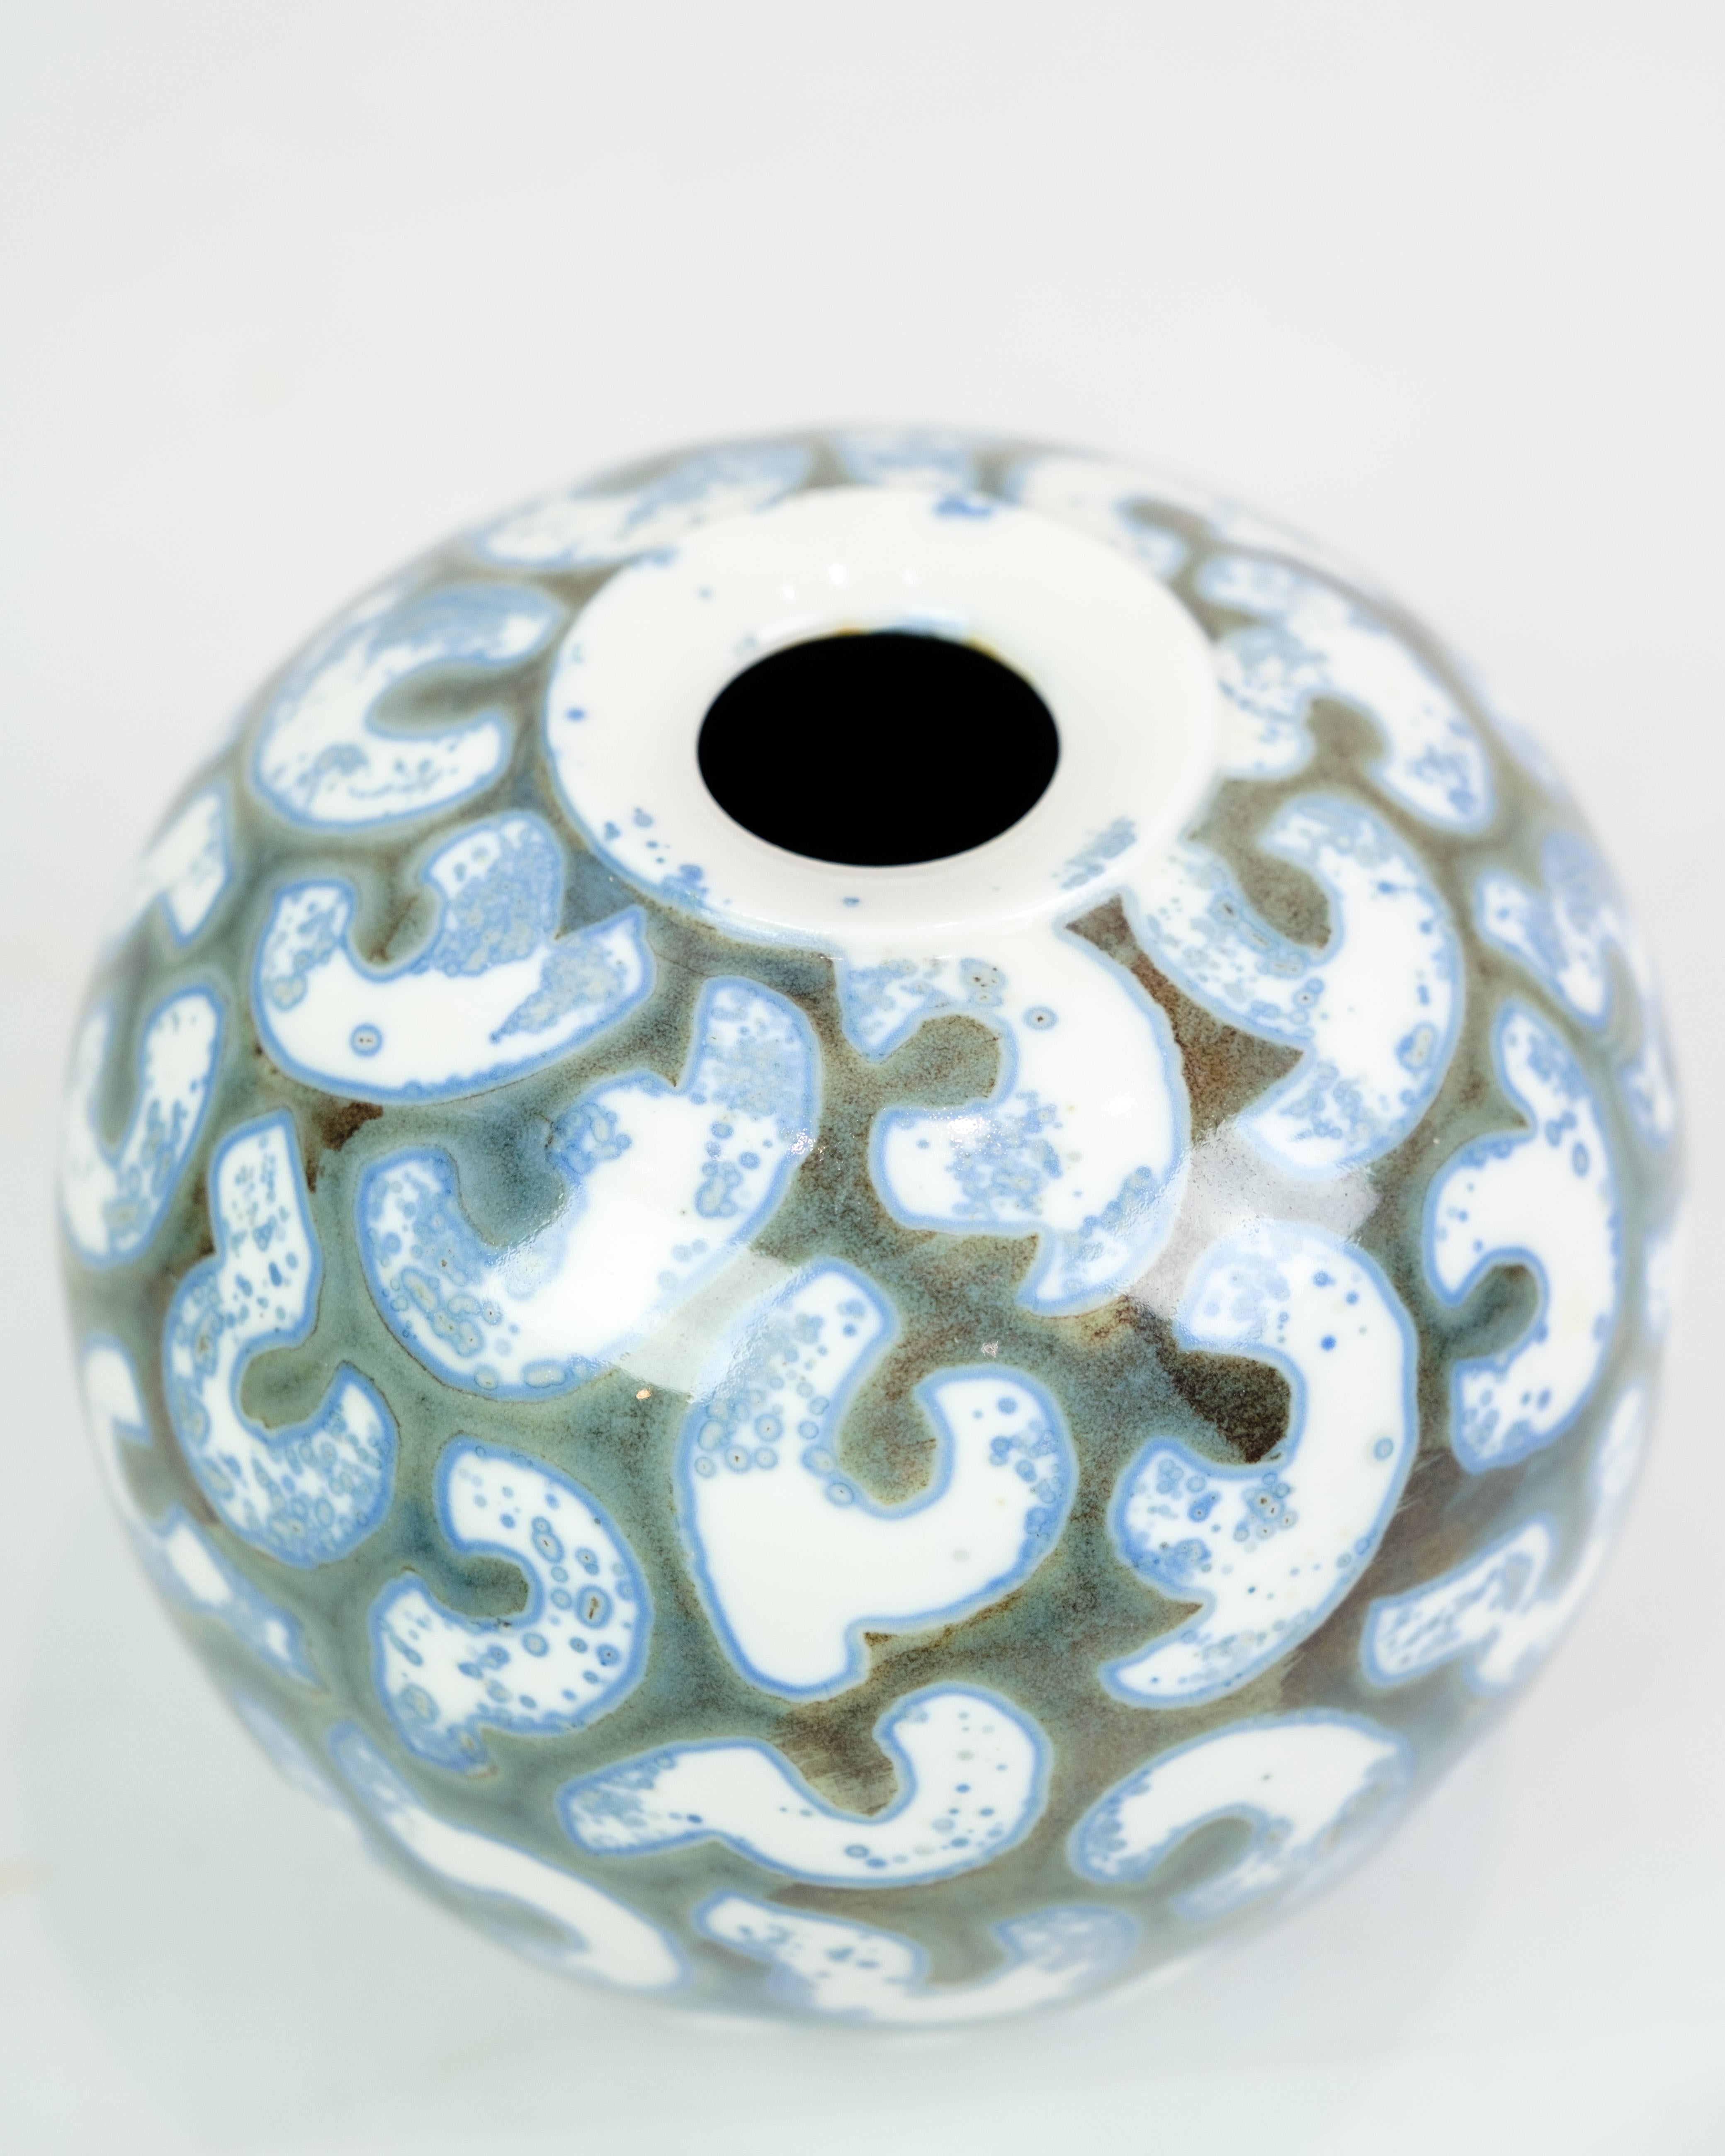 Danish Ceramic Vase With Blue and White Patterned, Designed By Per Weiss From 1990s For Sale